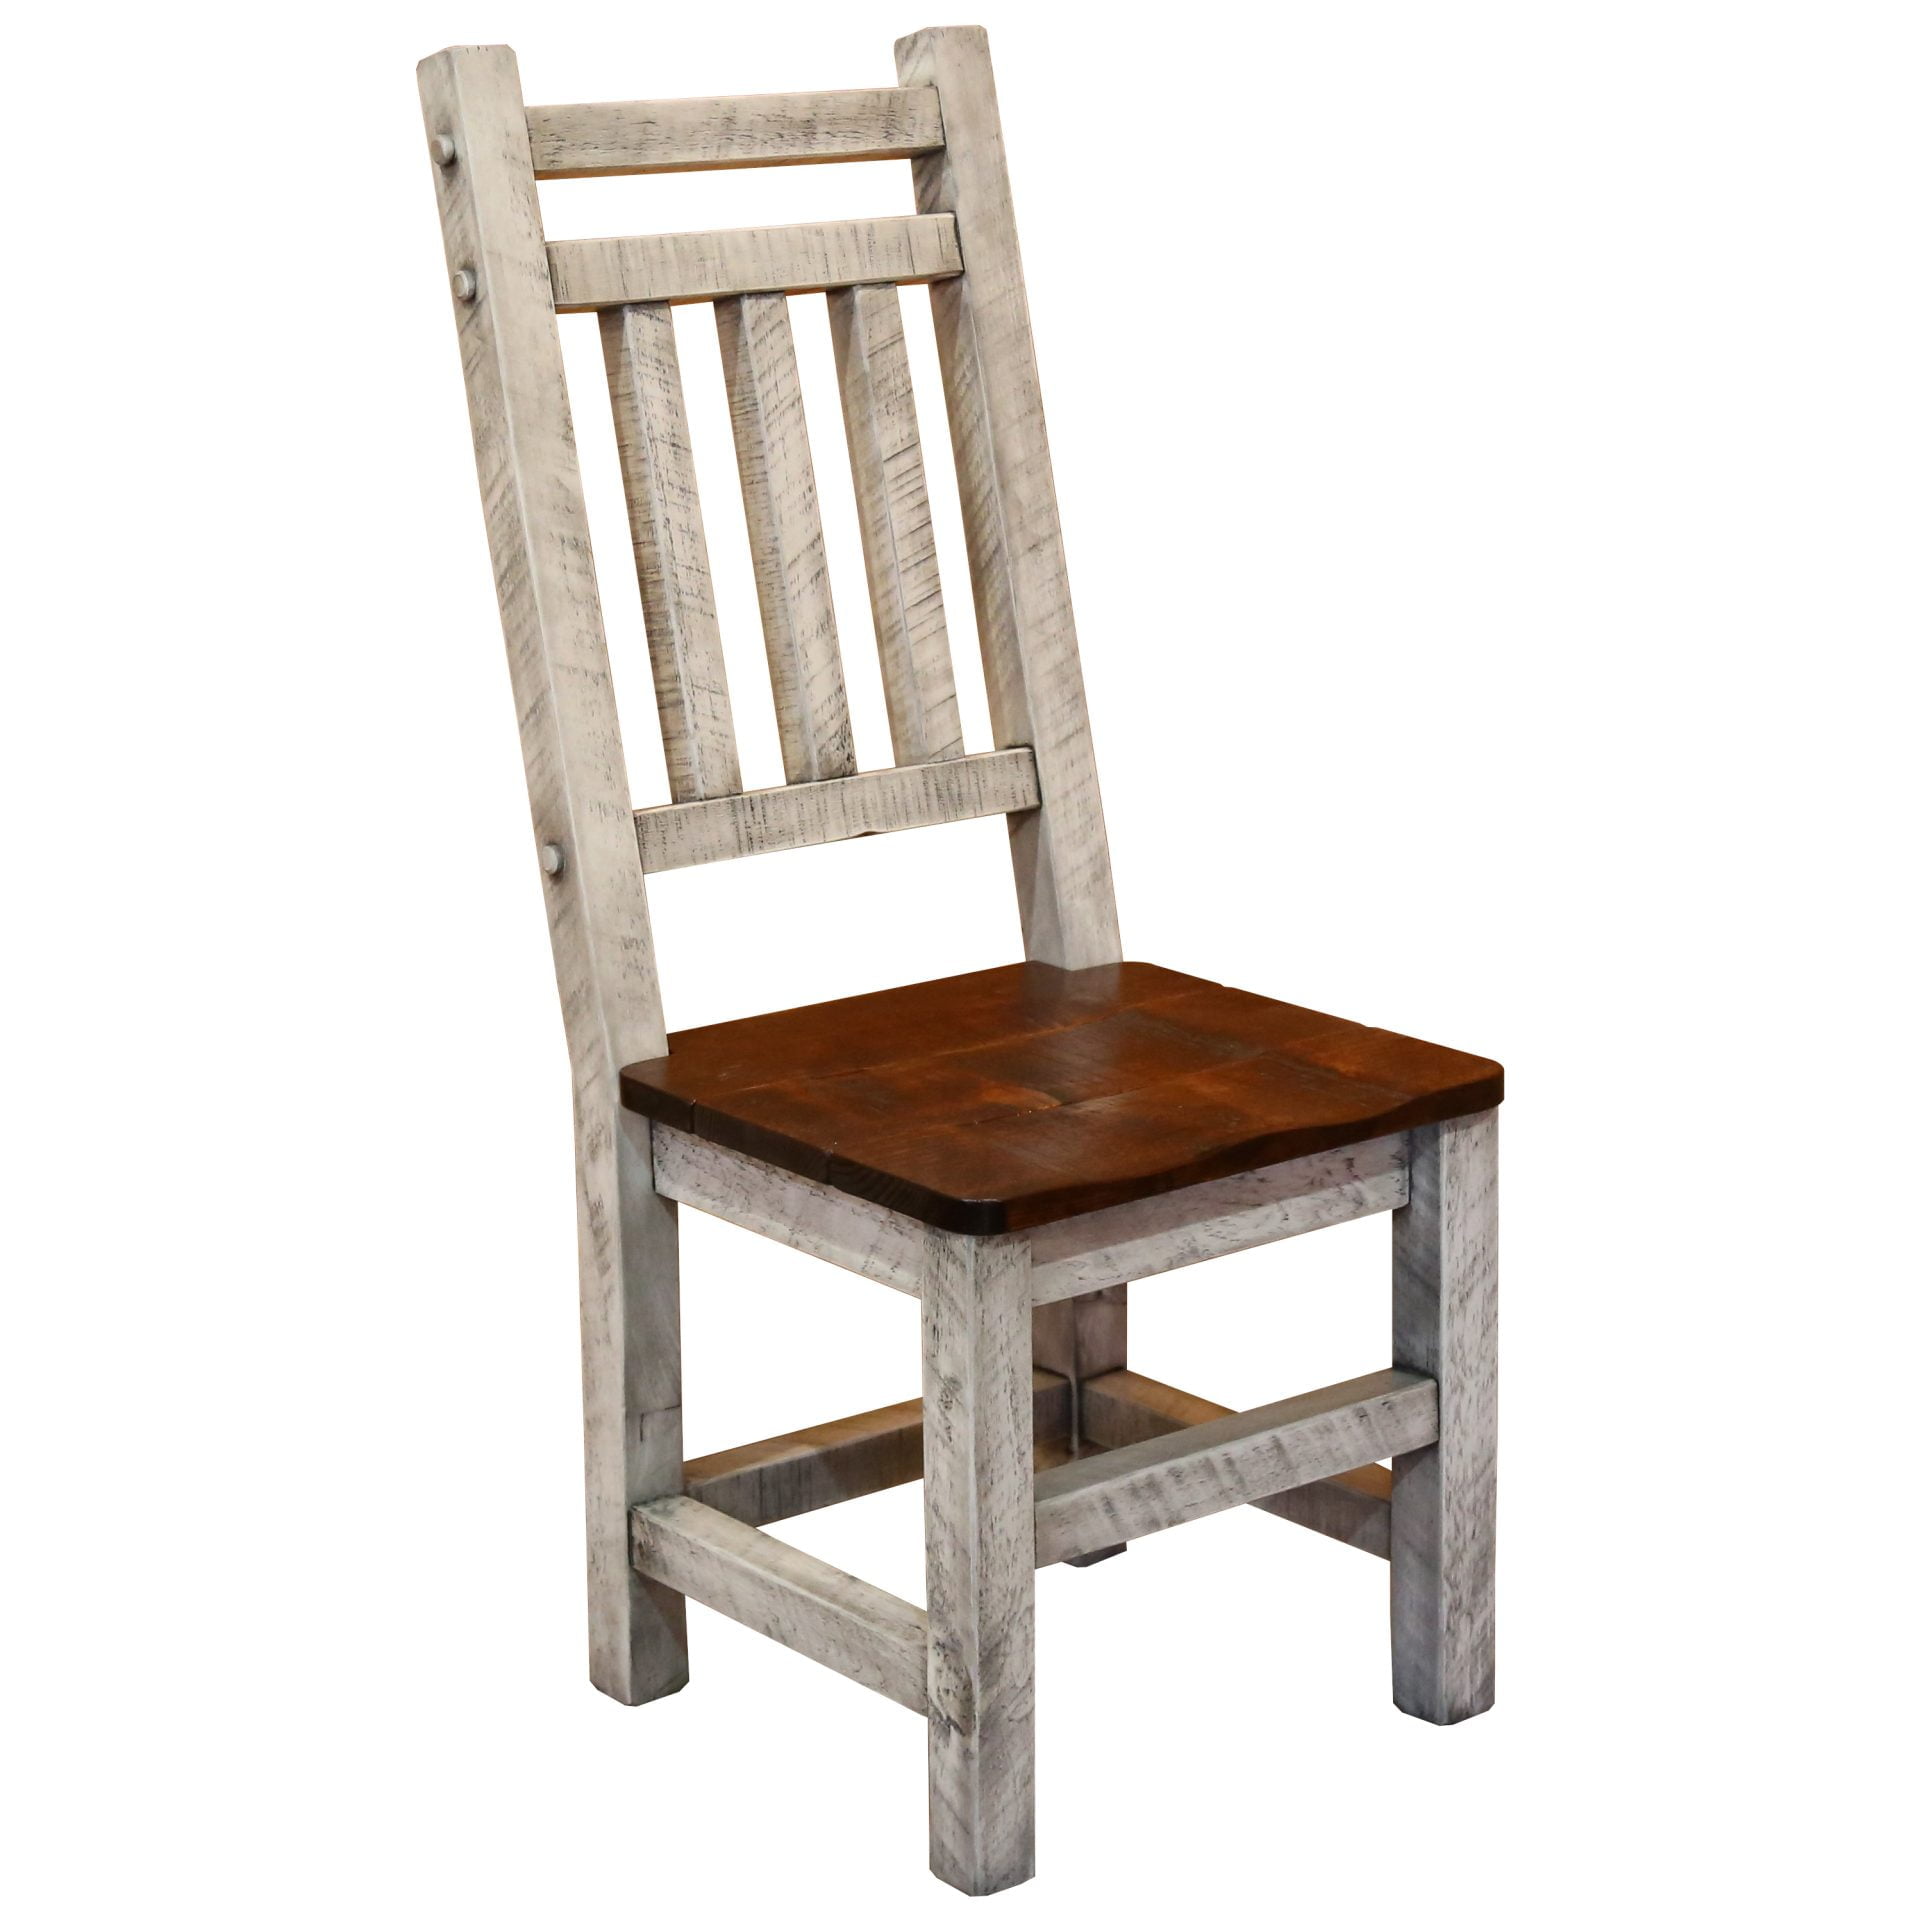 Set of 2 Barnwood Style Timber Peg Dining Chairs